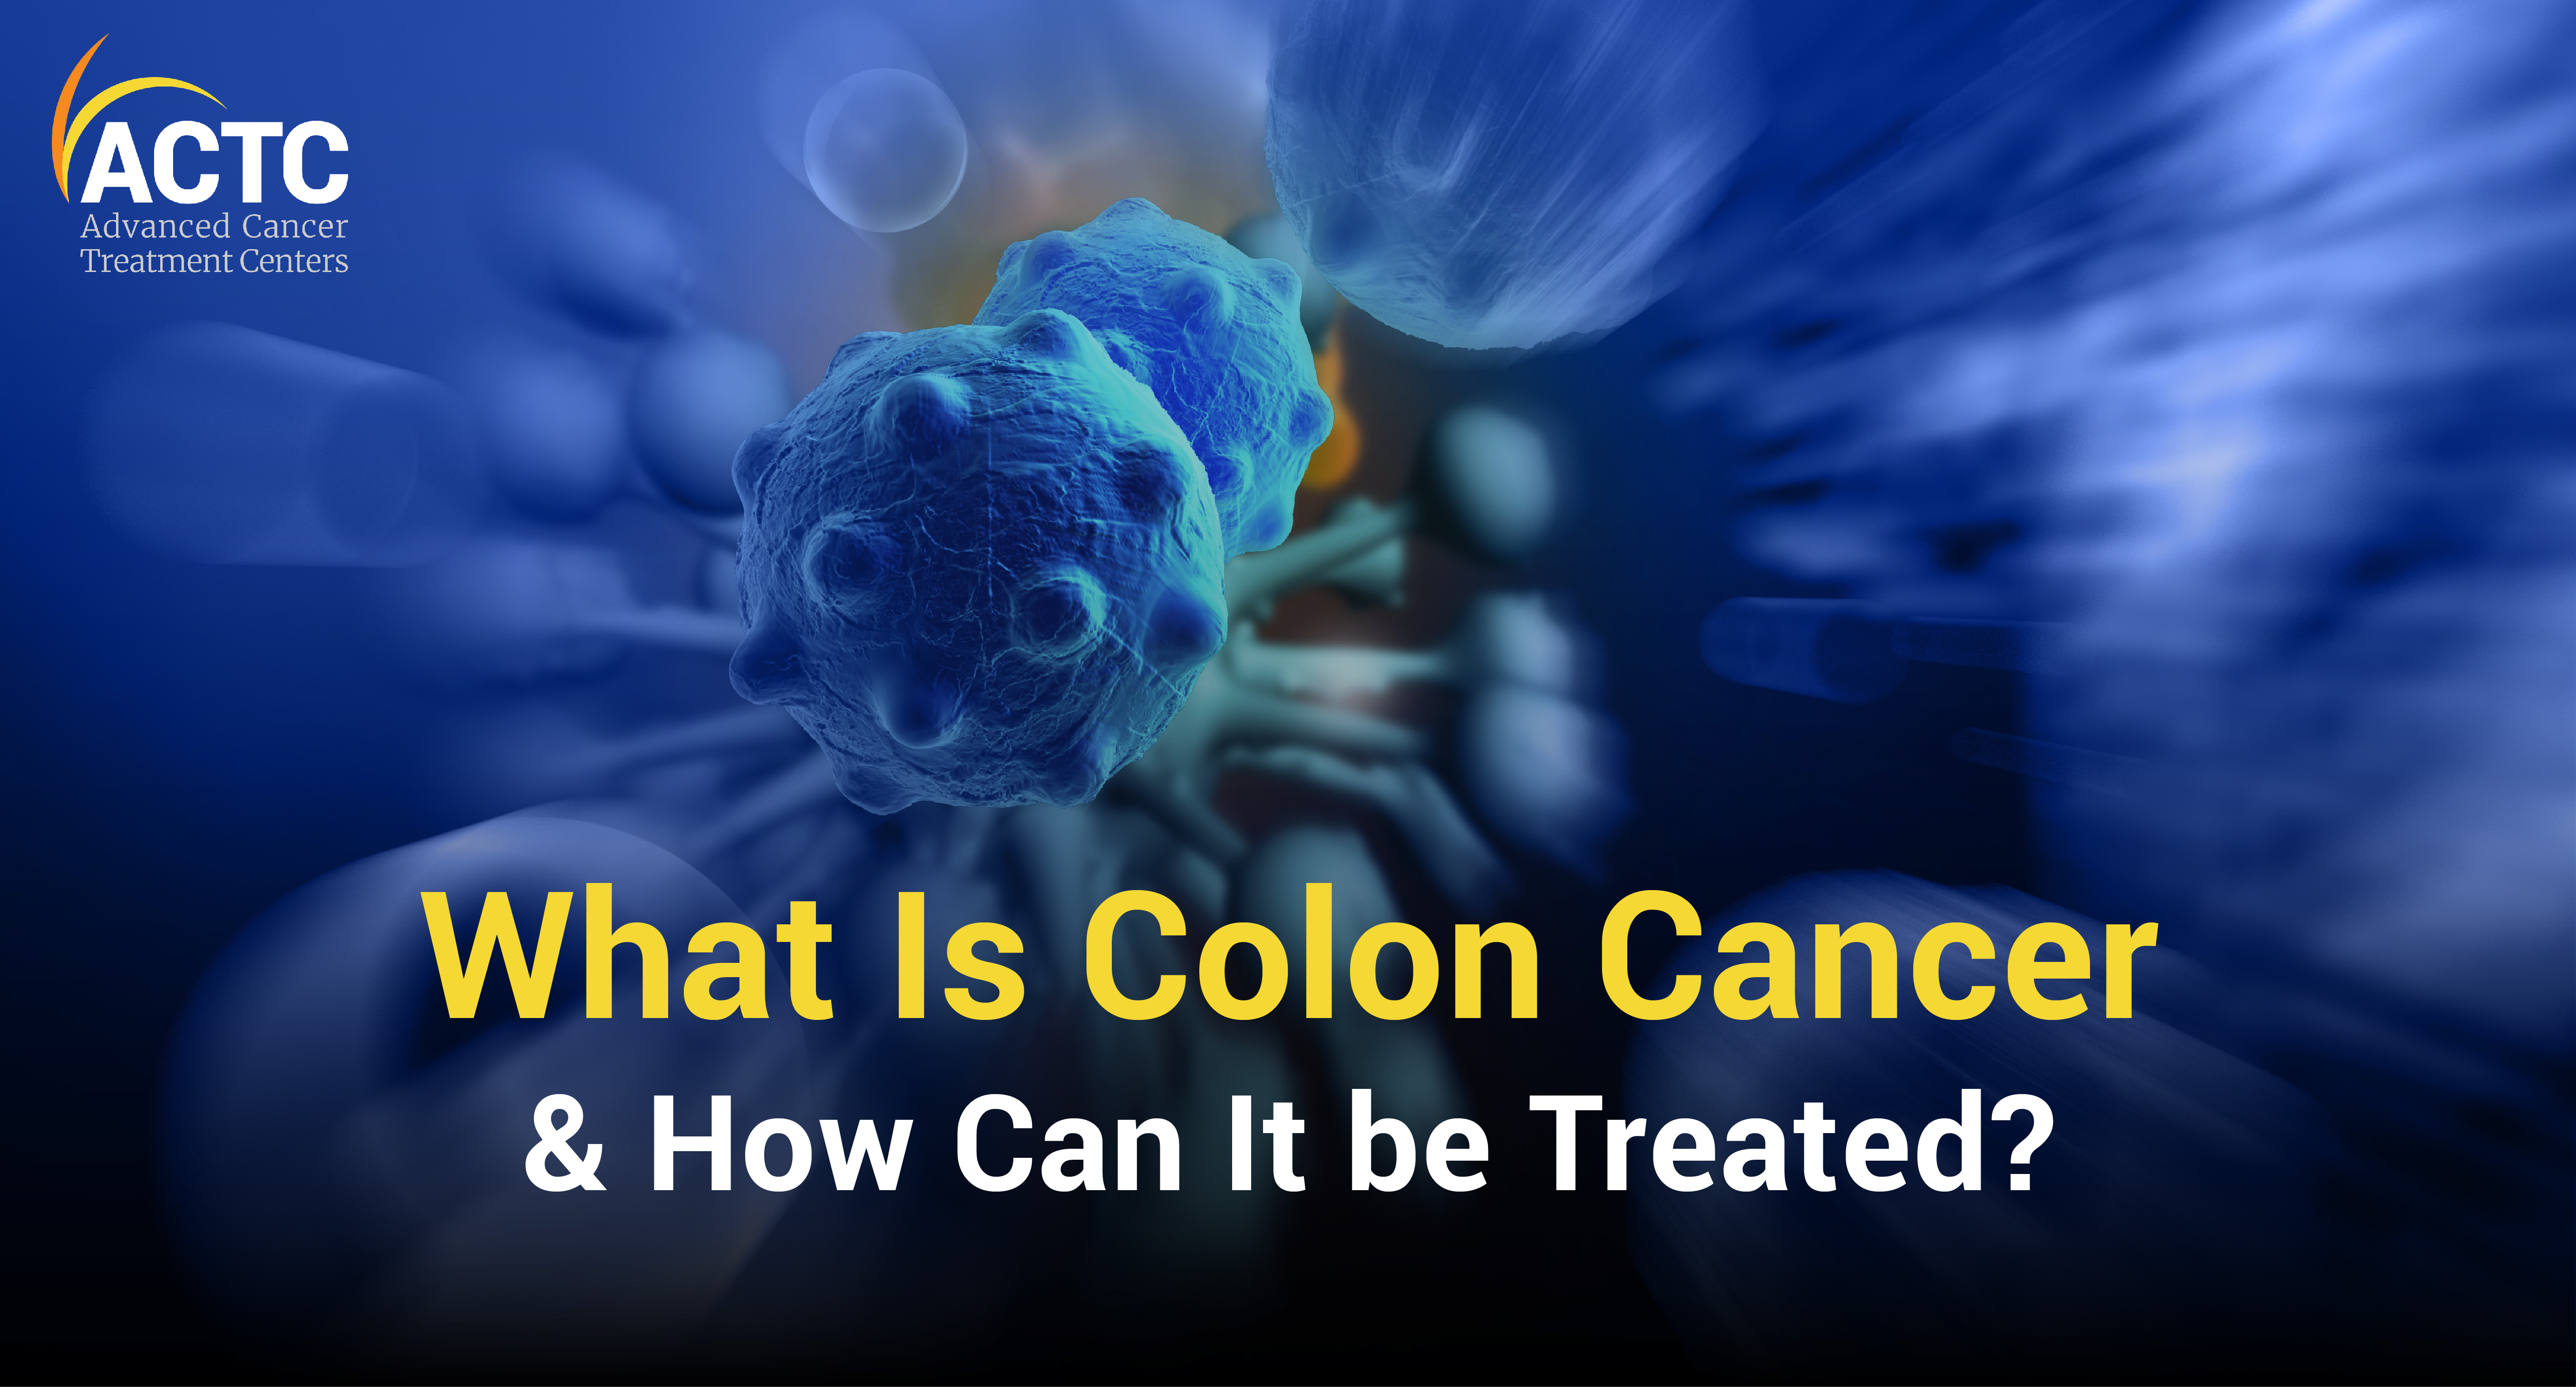 What Is Colon Cancer & How Can It Be Treated?